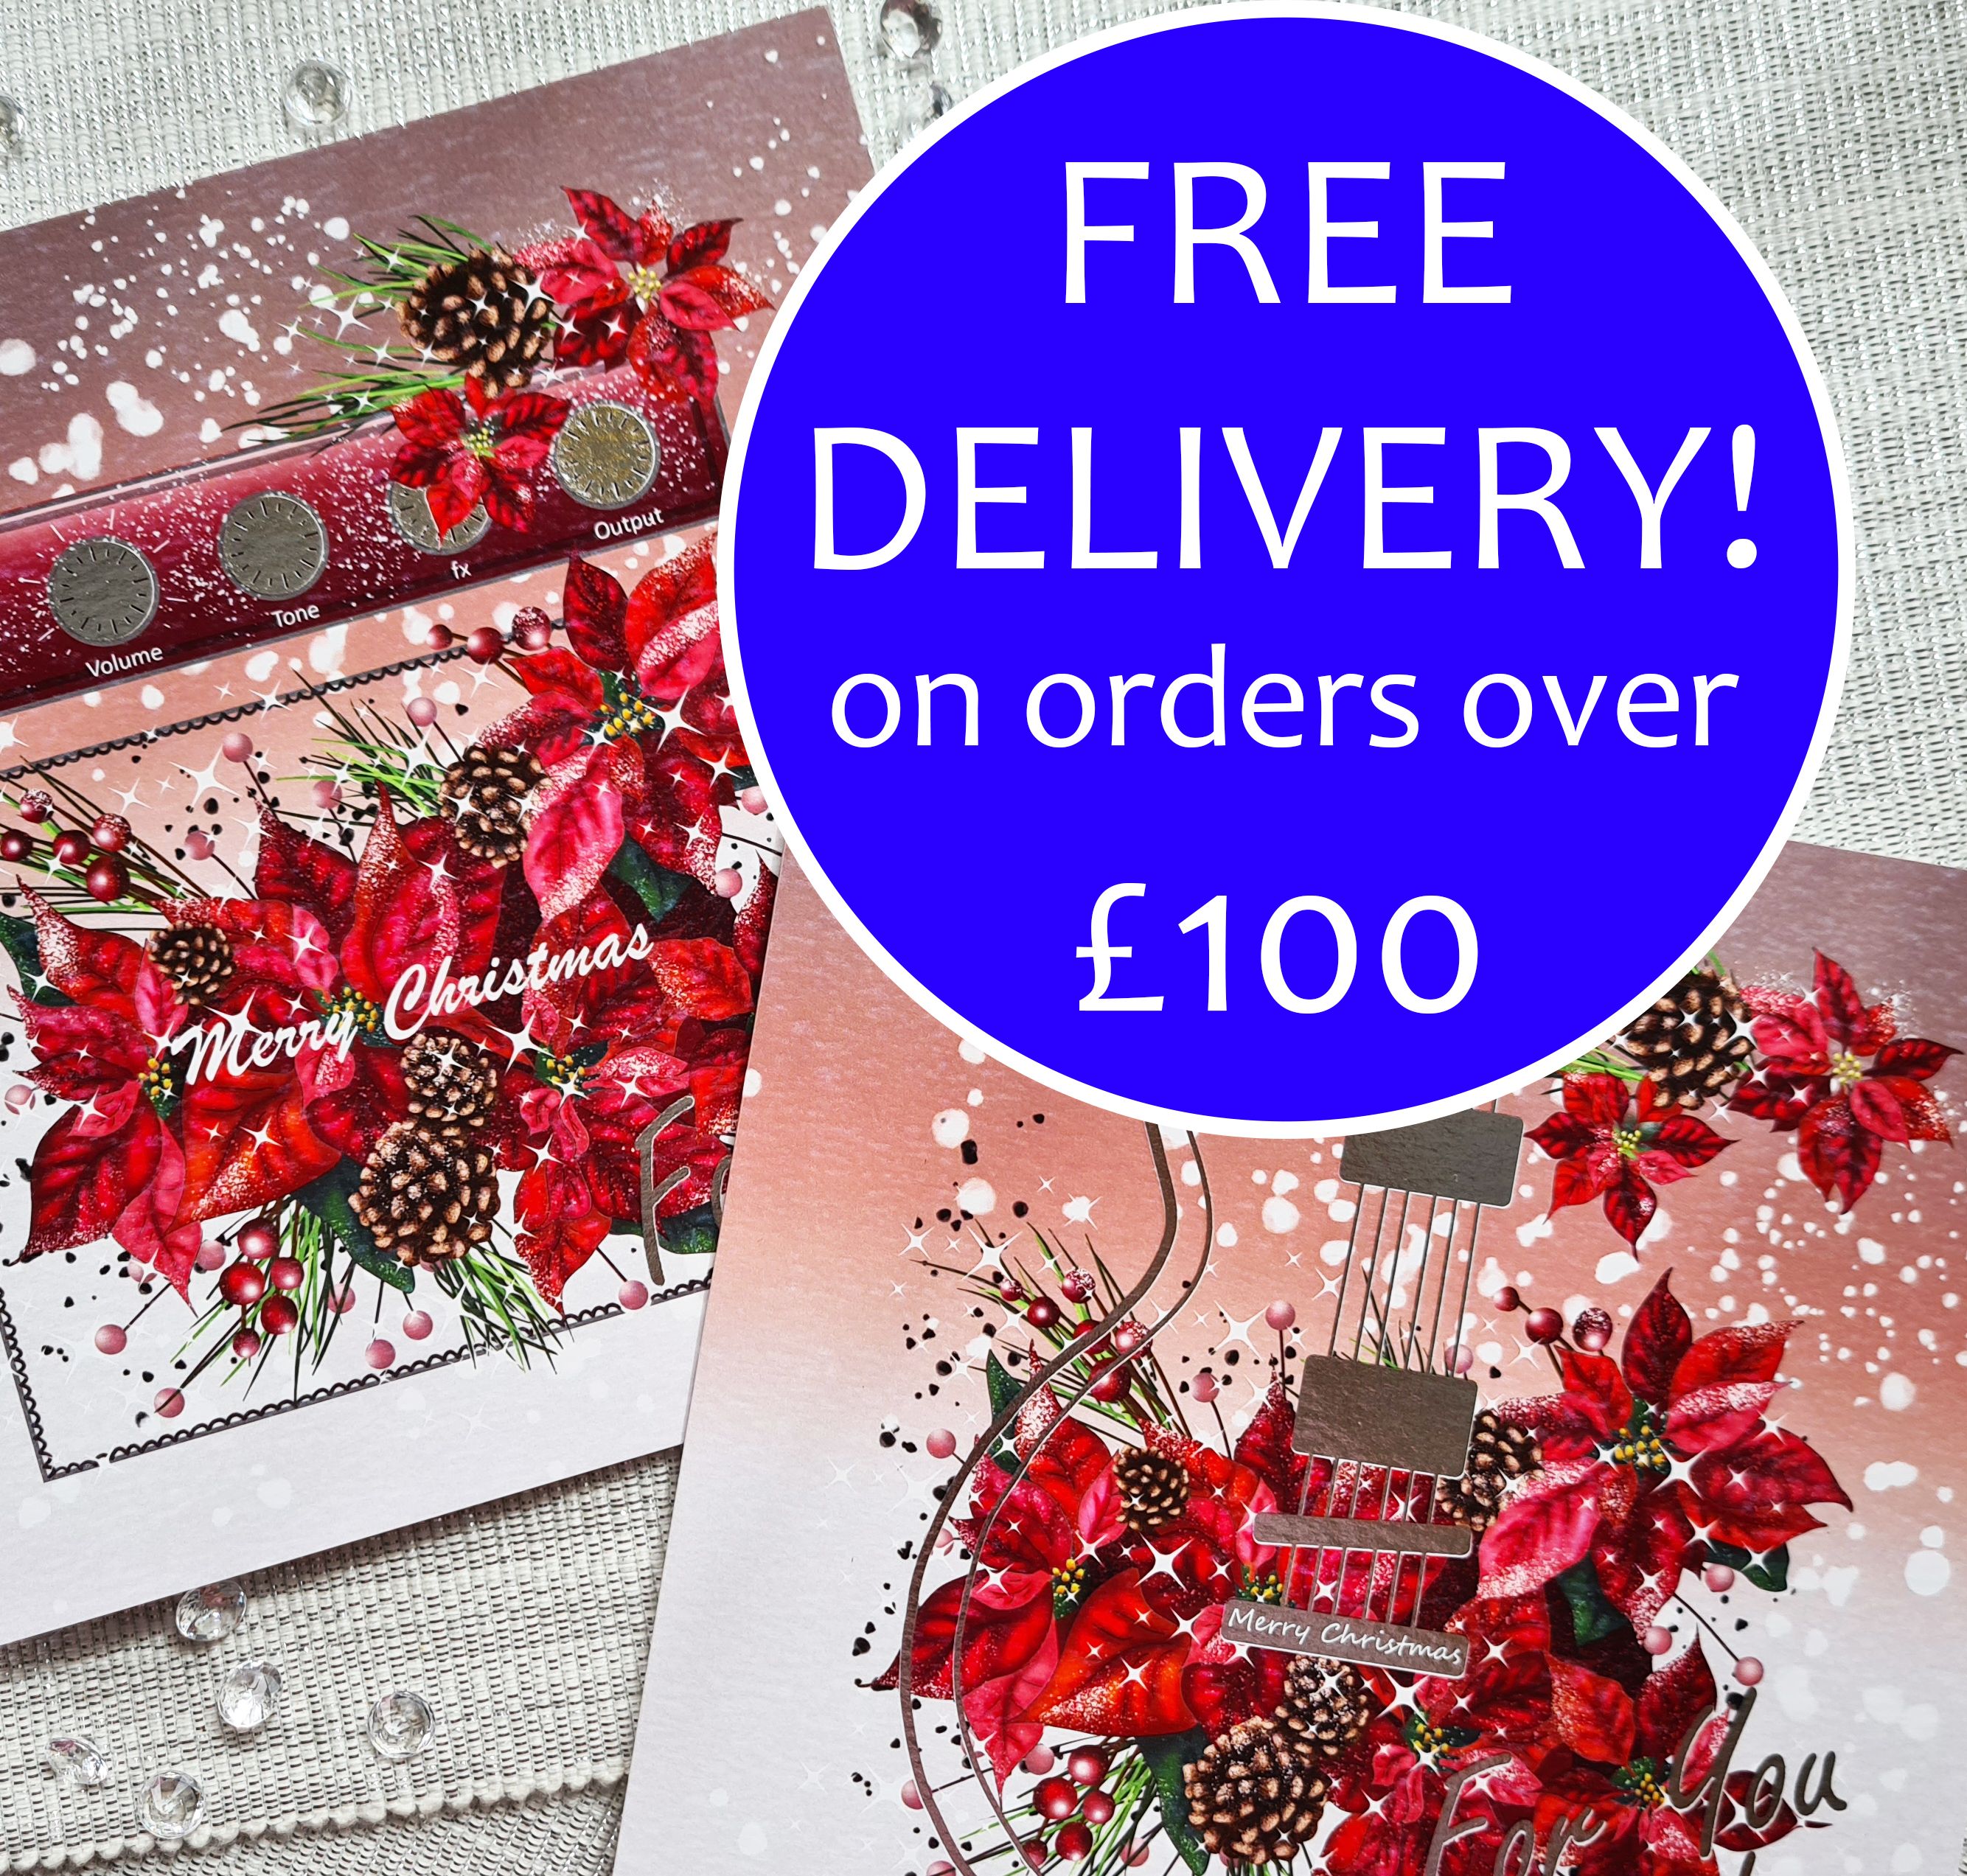 FREE DELIVERY on all orders over £100!